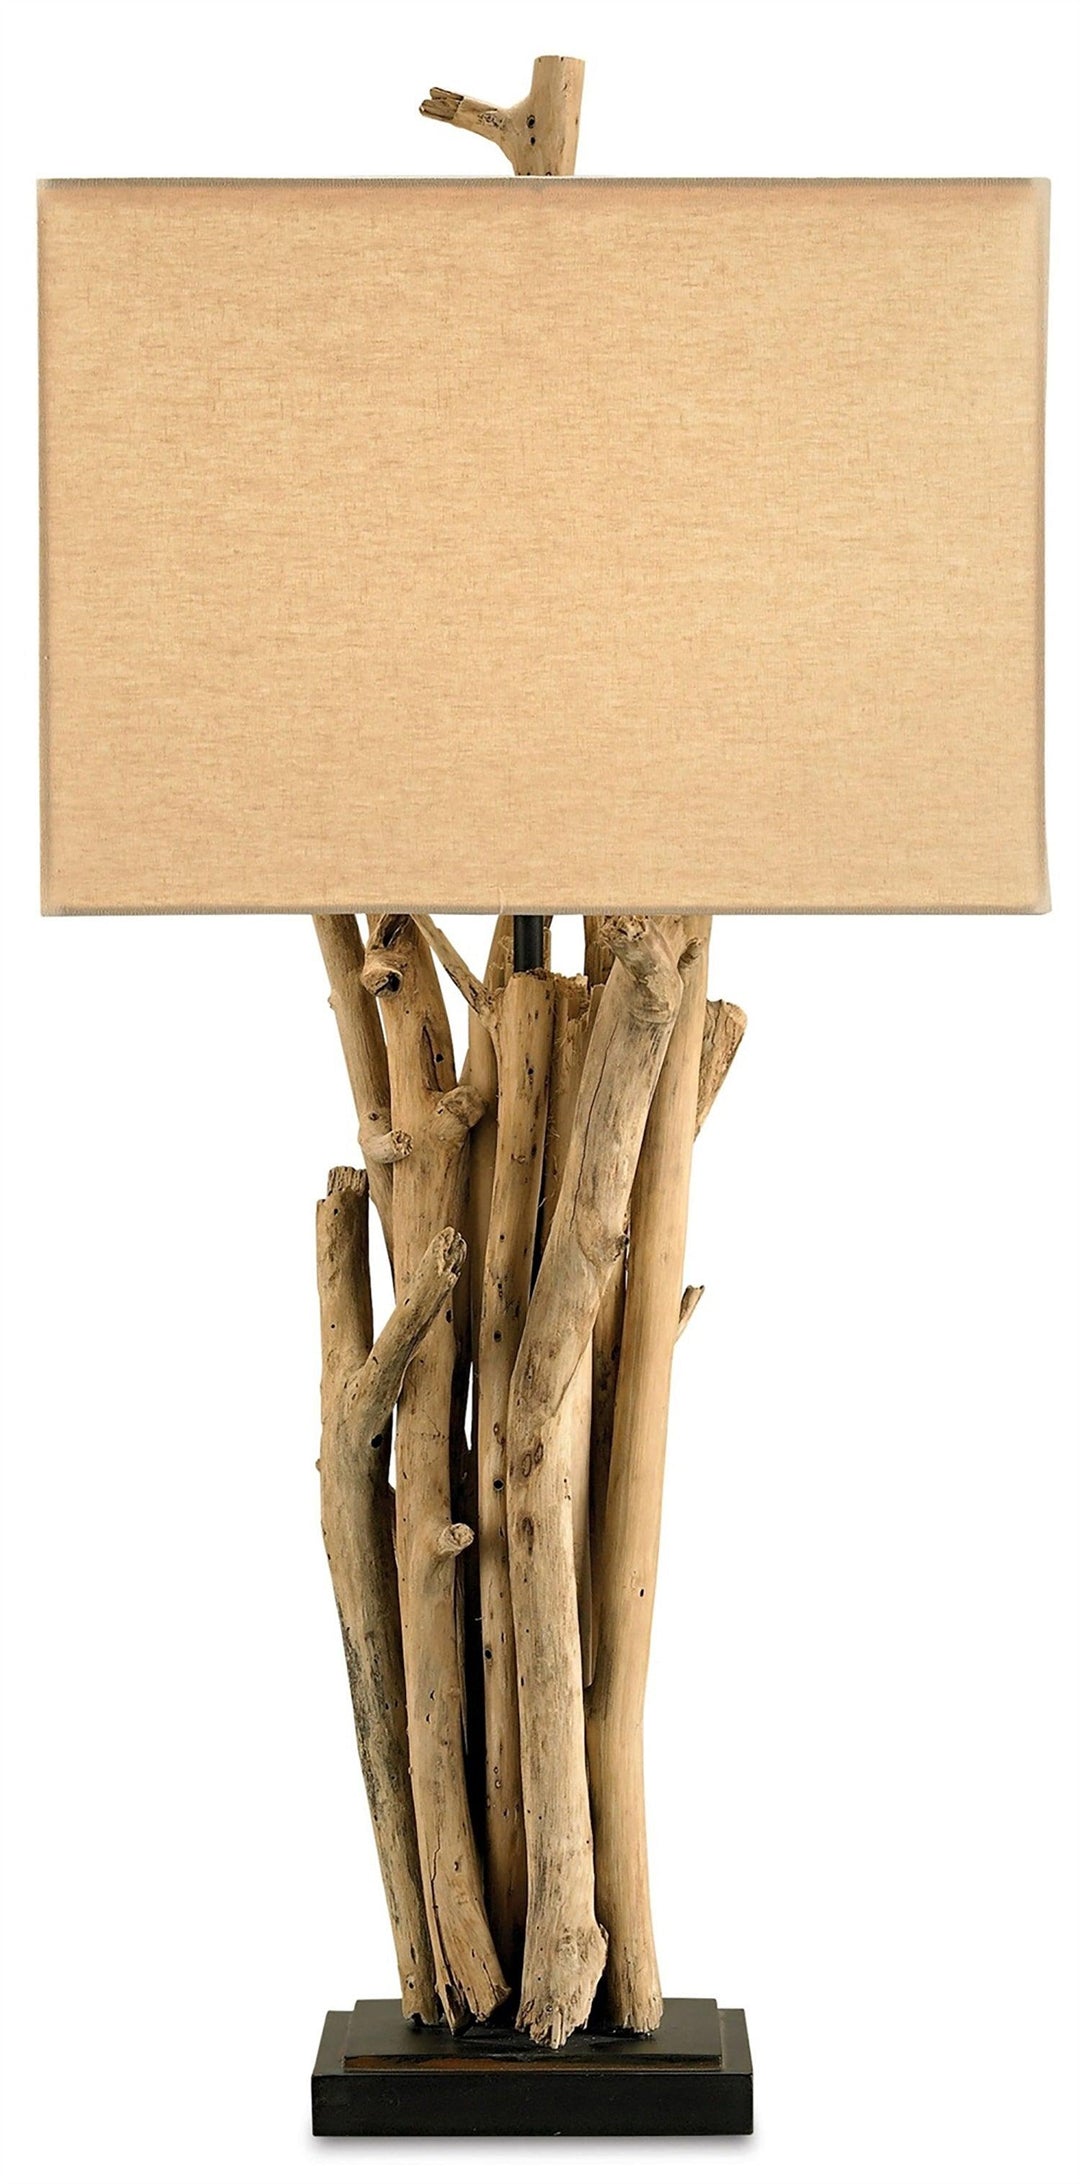 Driftwood Table Lamp - Casey & Company